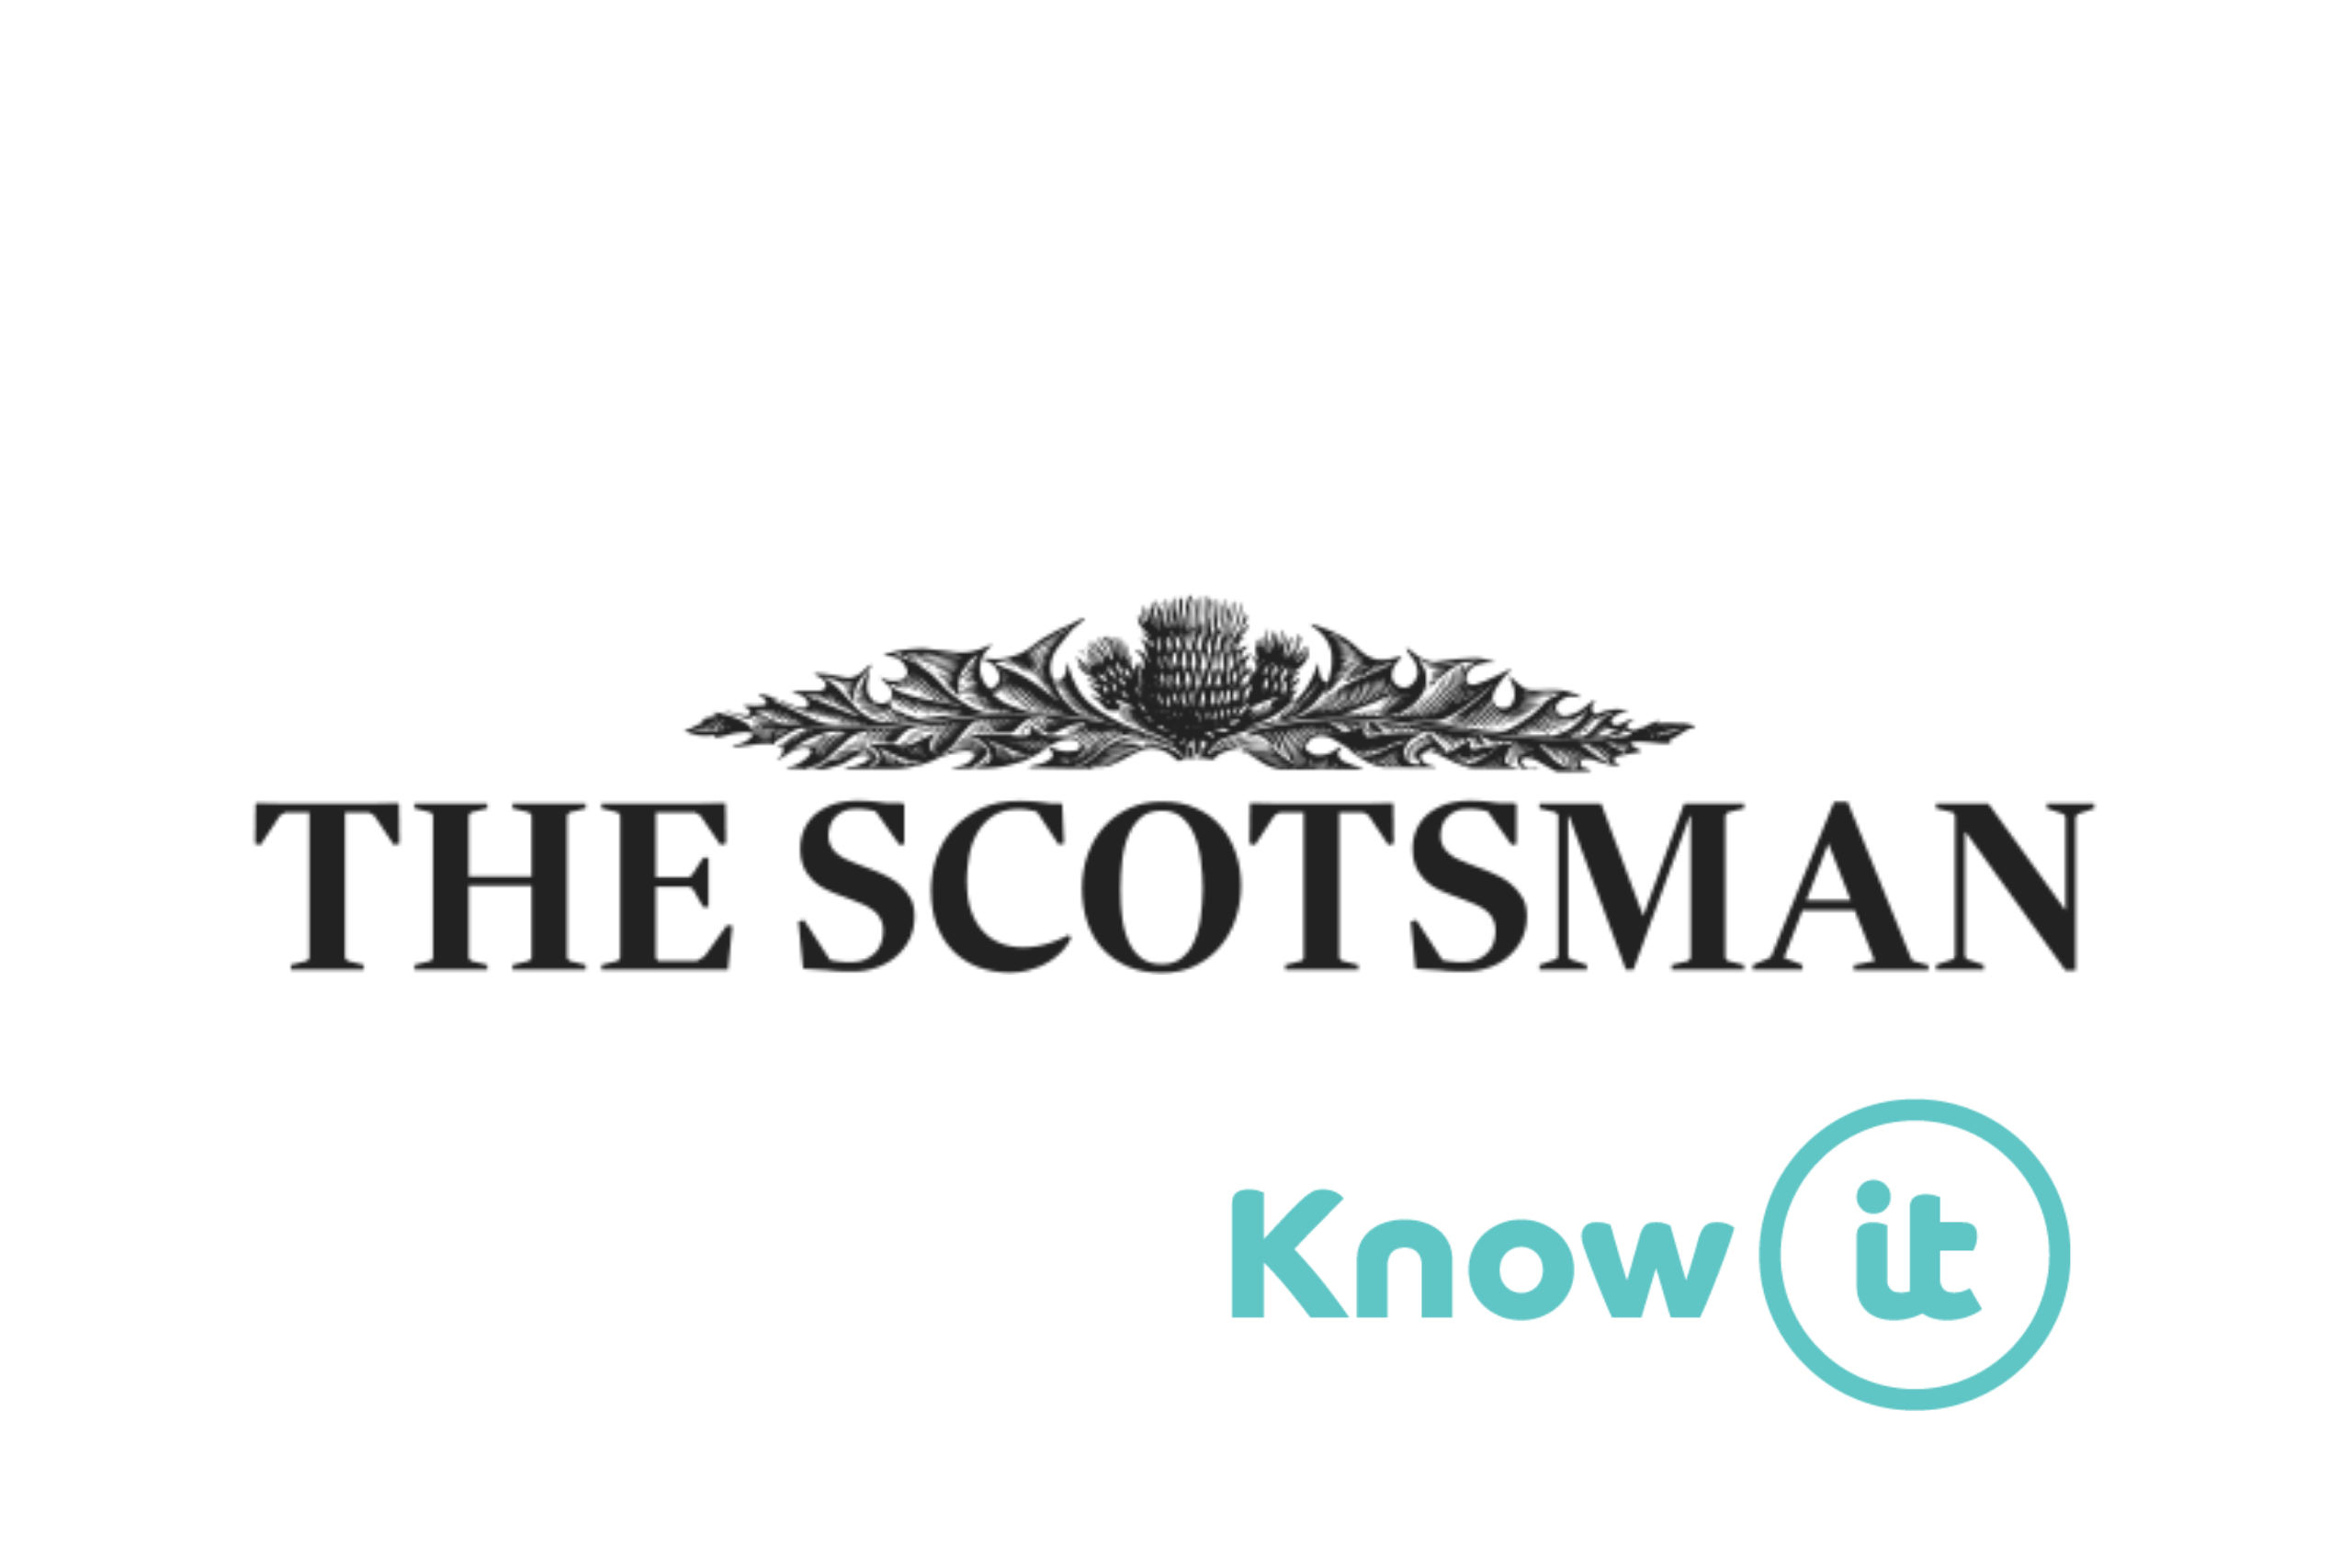 Know-it logo with The Scotsman logo